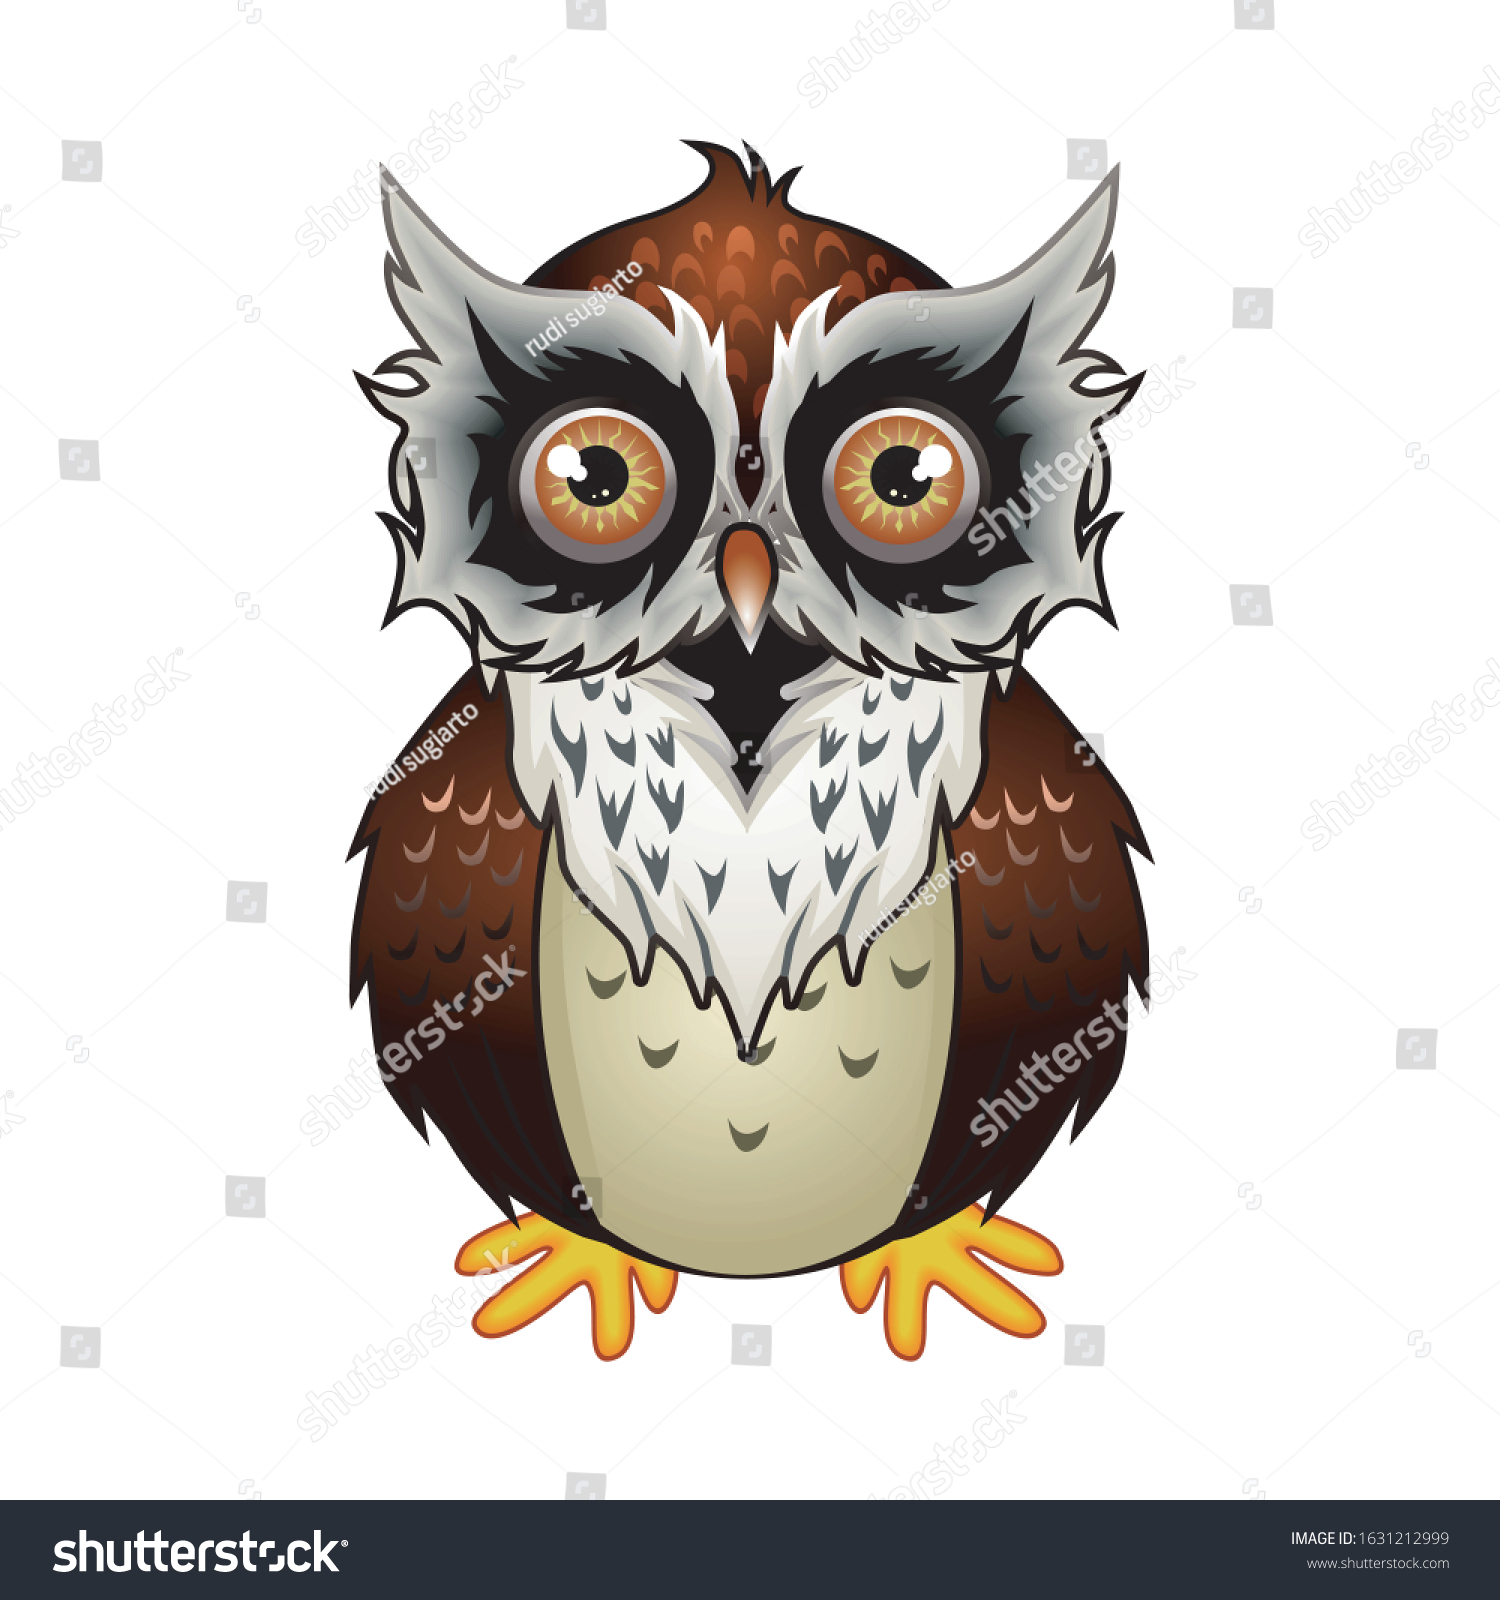 Owl Clipart Education Illustration Book Cover Stock Vector (Royalty ...